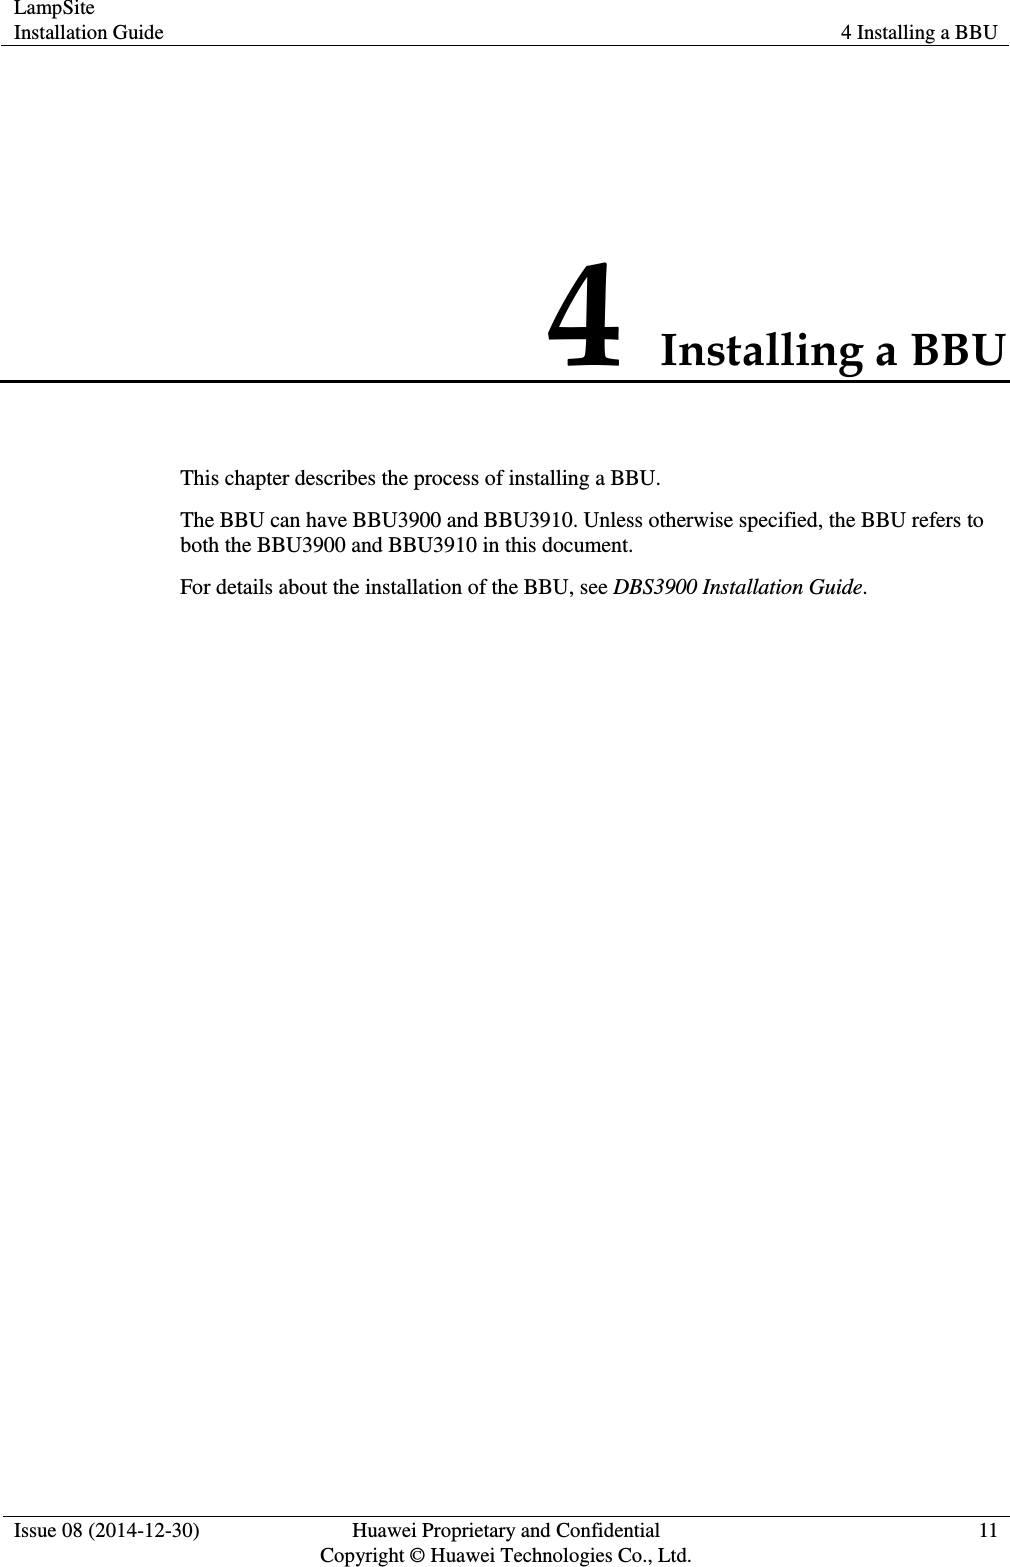 LampSite Installation Guide 4 Installing a BBU  Issue 08 (2014-12-30) Huawei Proprietary and Confidential                                     Copyright © Huawei Technologies Co., Ltd. 11  4 Installing a BBU This chapter describes the process of installing a BBU.   The BBU can have BBU3900 and BBU3910. Unless otherwise specified, the BBU refers to both the BBU3900 and BBU3910 in this document. For details about the installation of the BBU, see DBS3900 Installation Guide. 